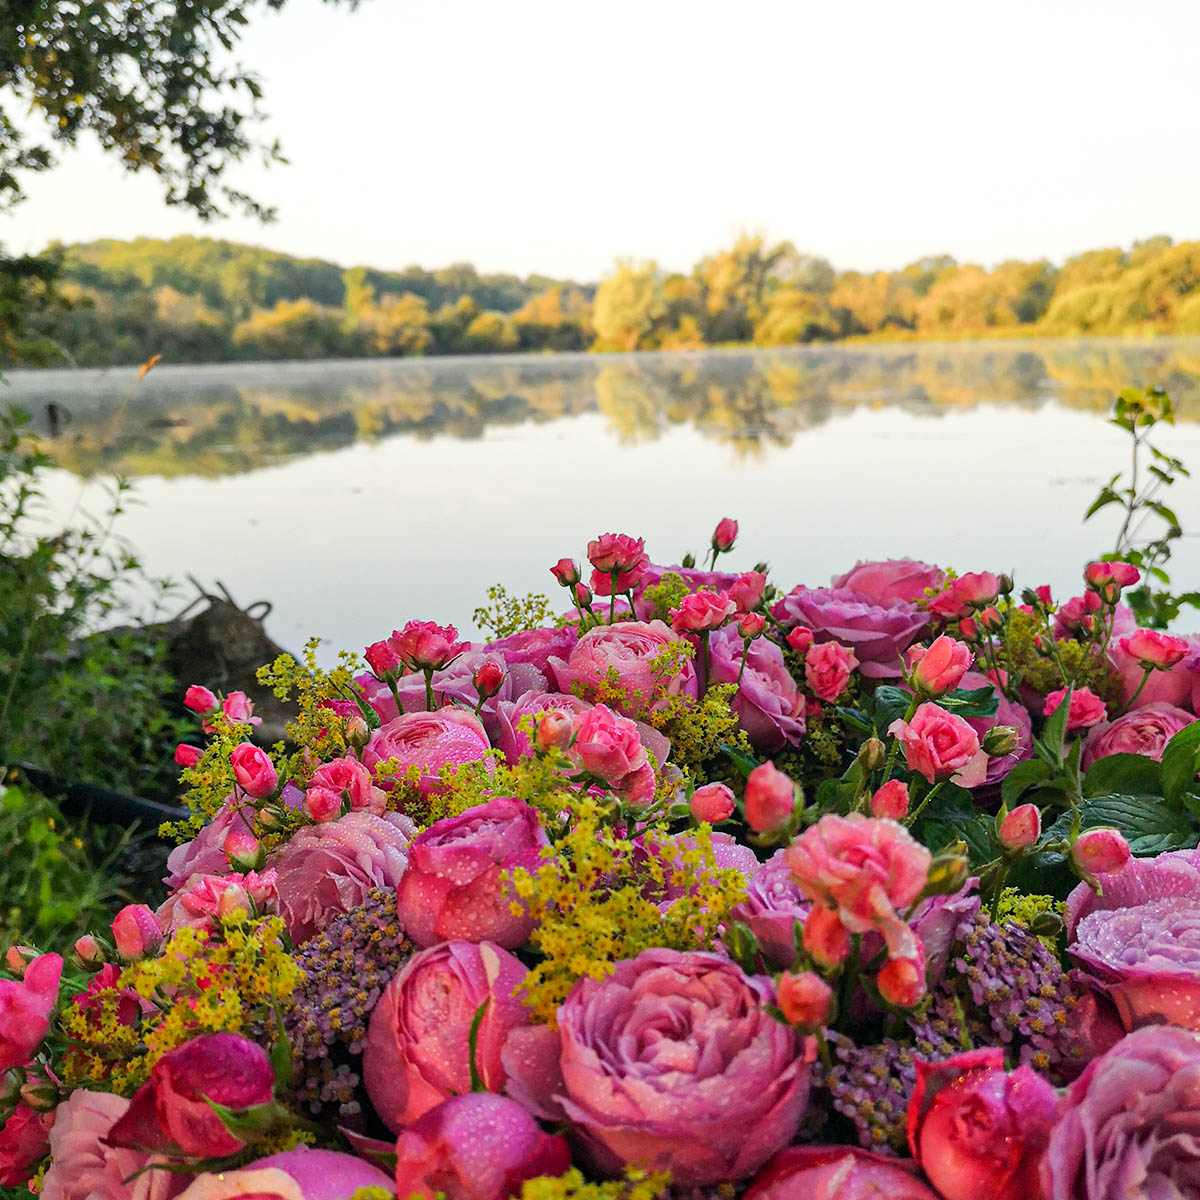 my-magical-morning-along-a-pond-created-this-rose-design-featured